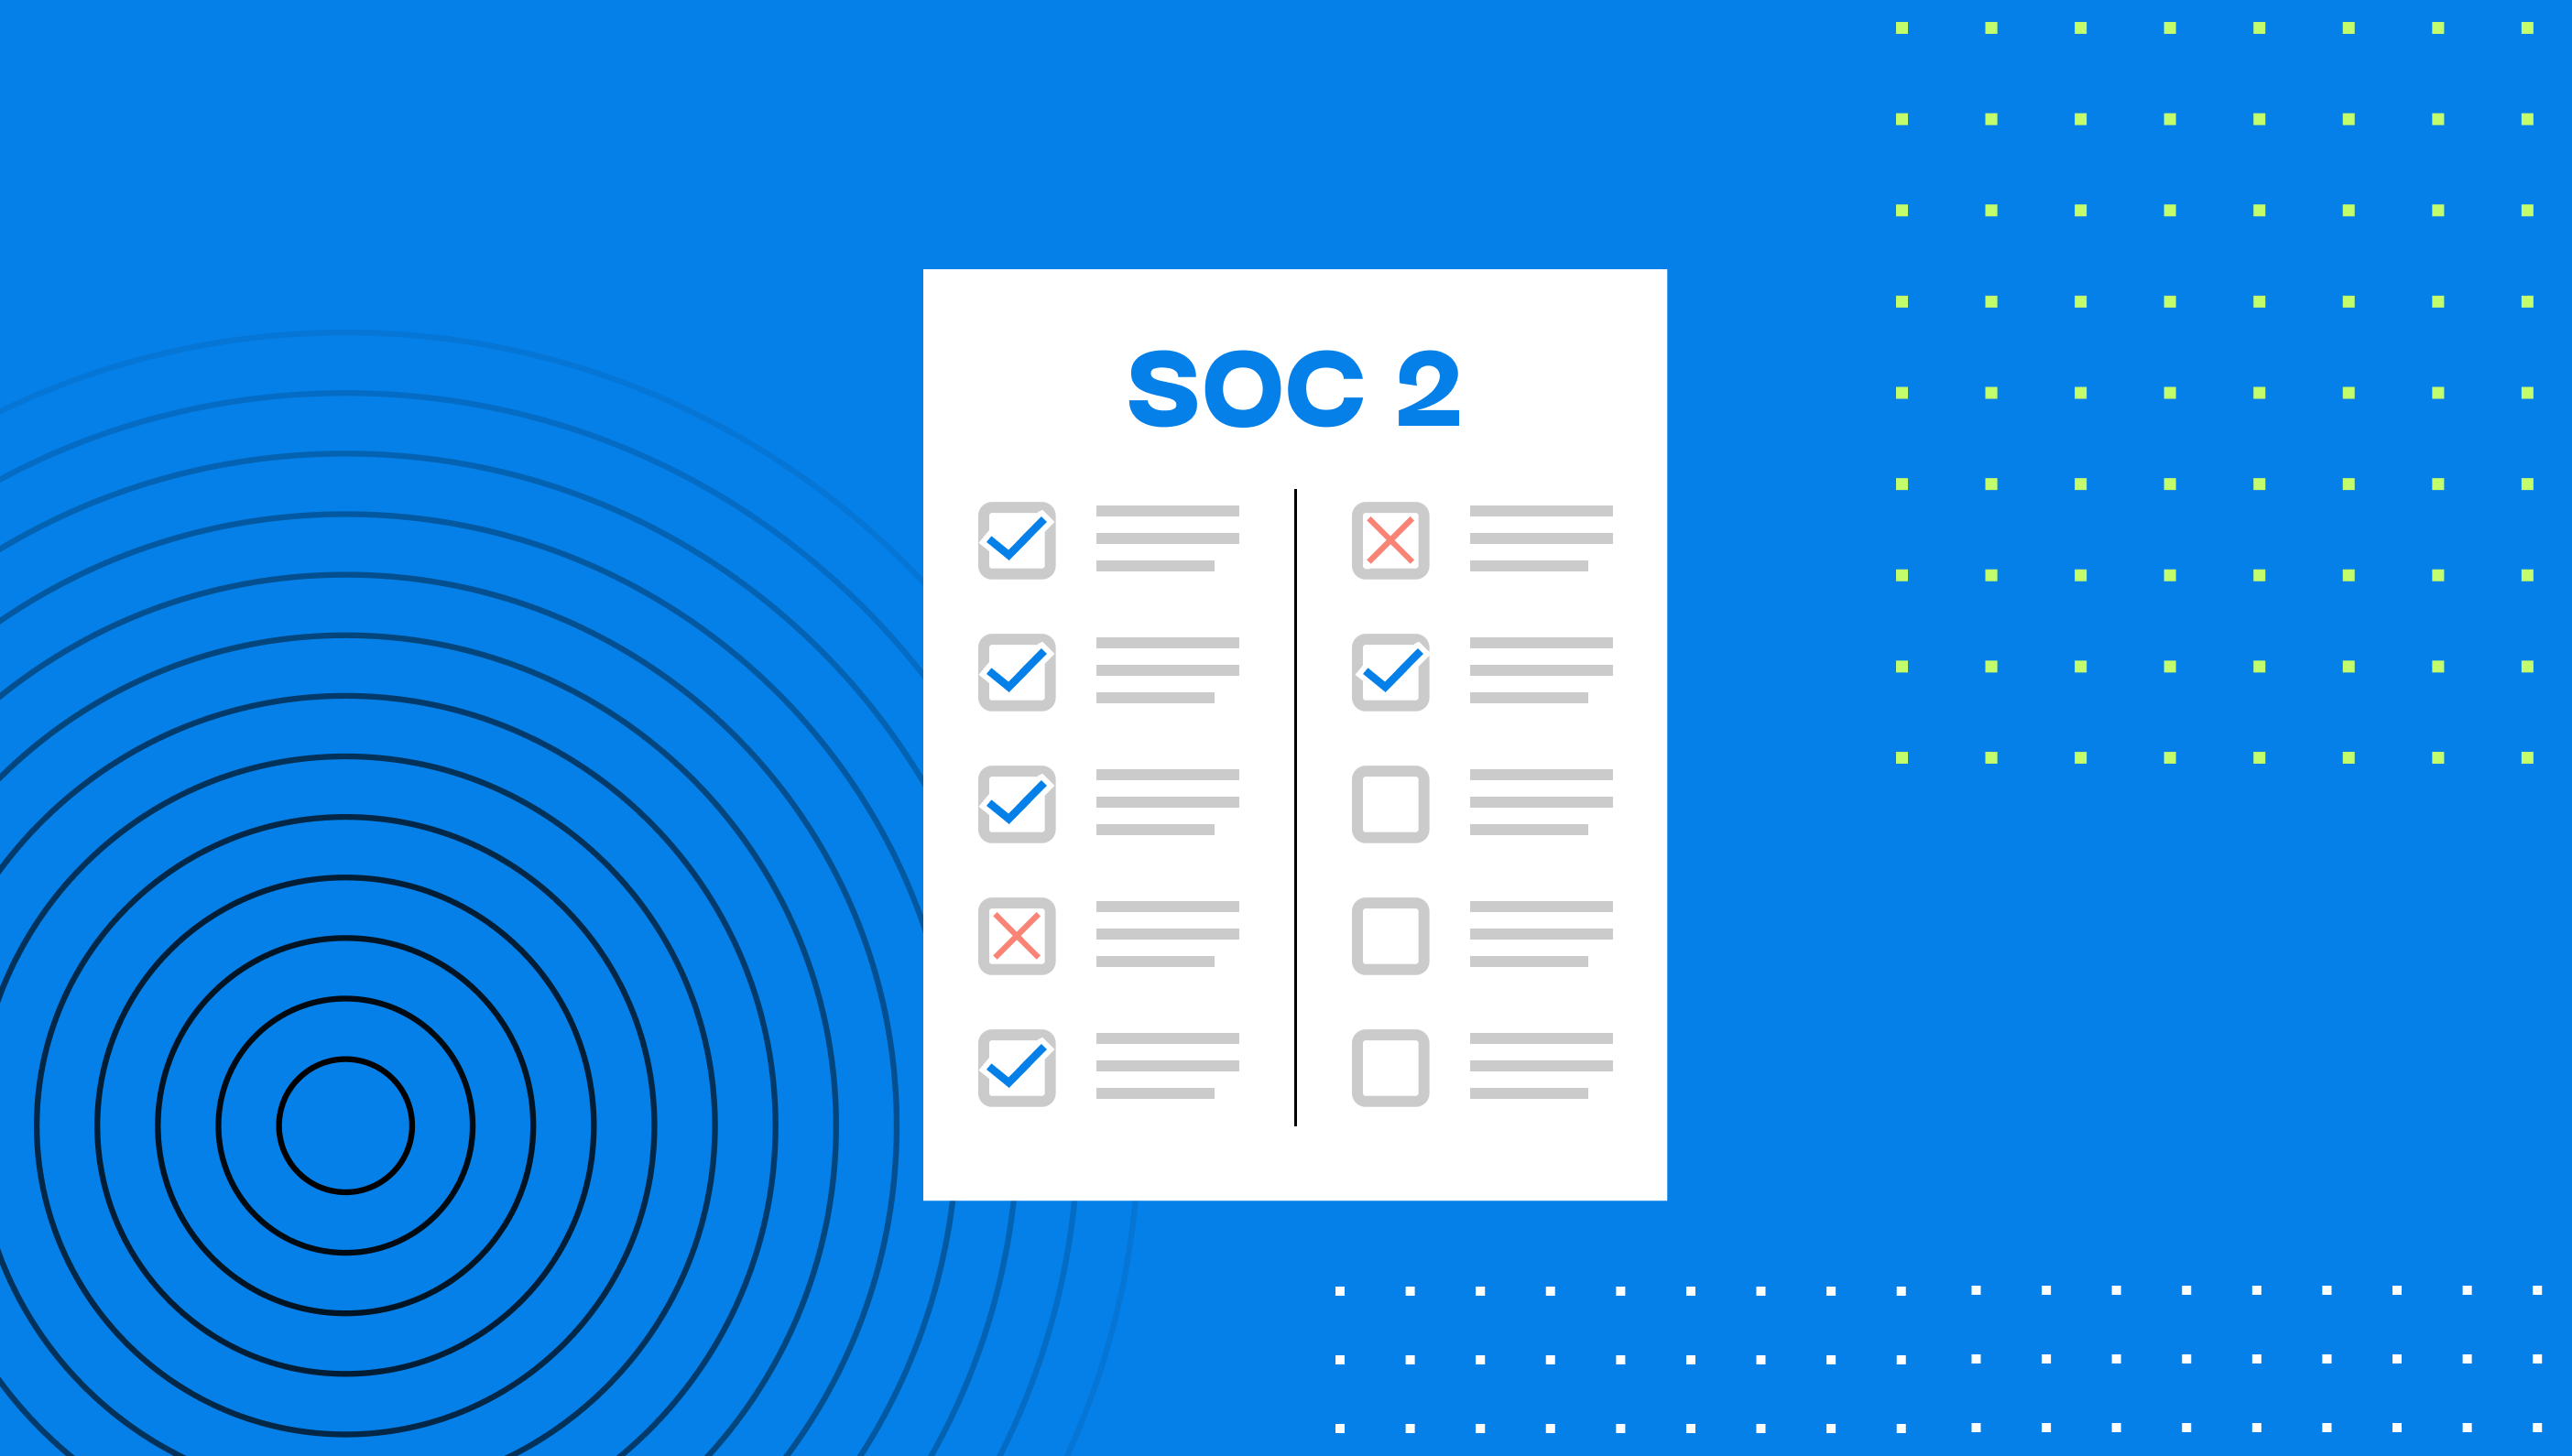 Auditing Exceptions and How They Might Impact Your SOC Reports